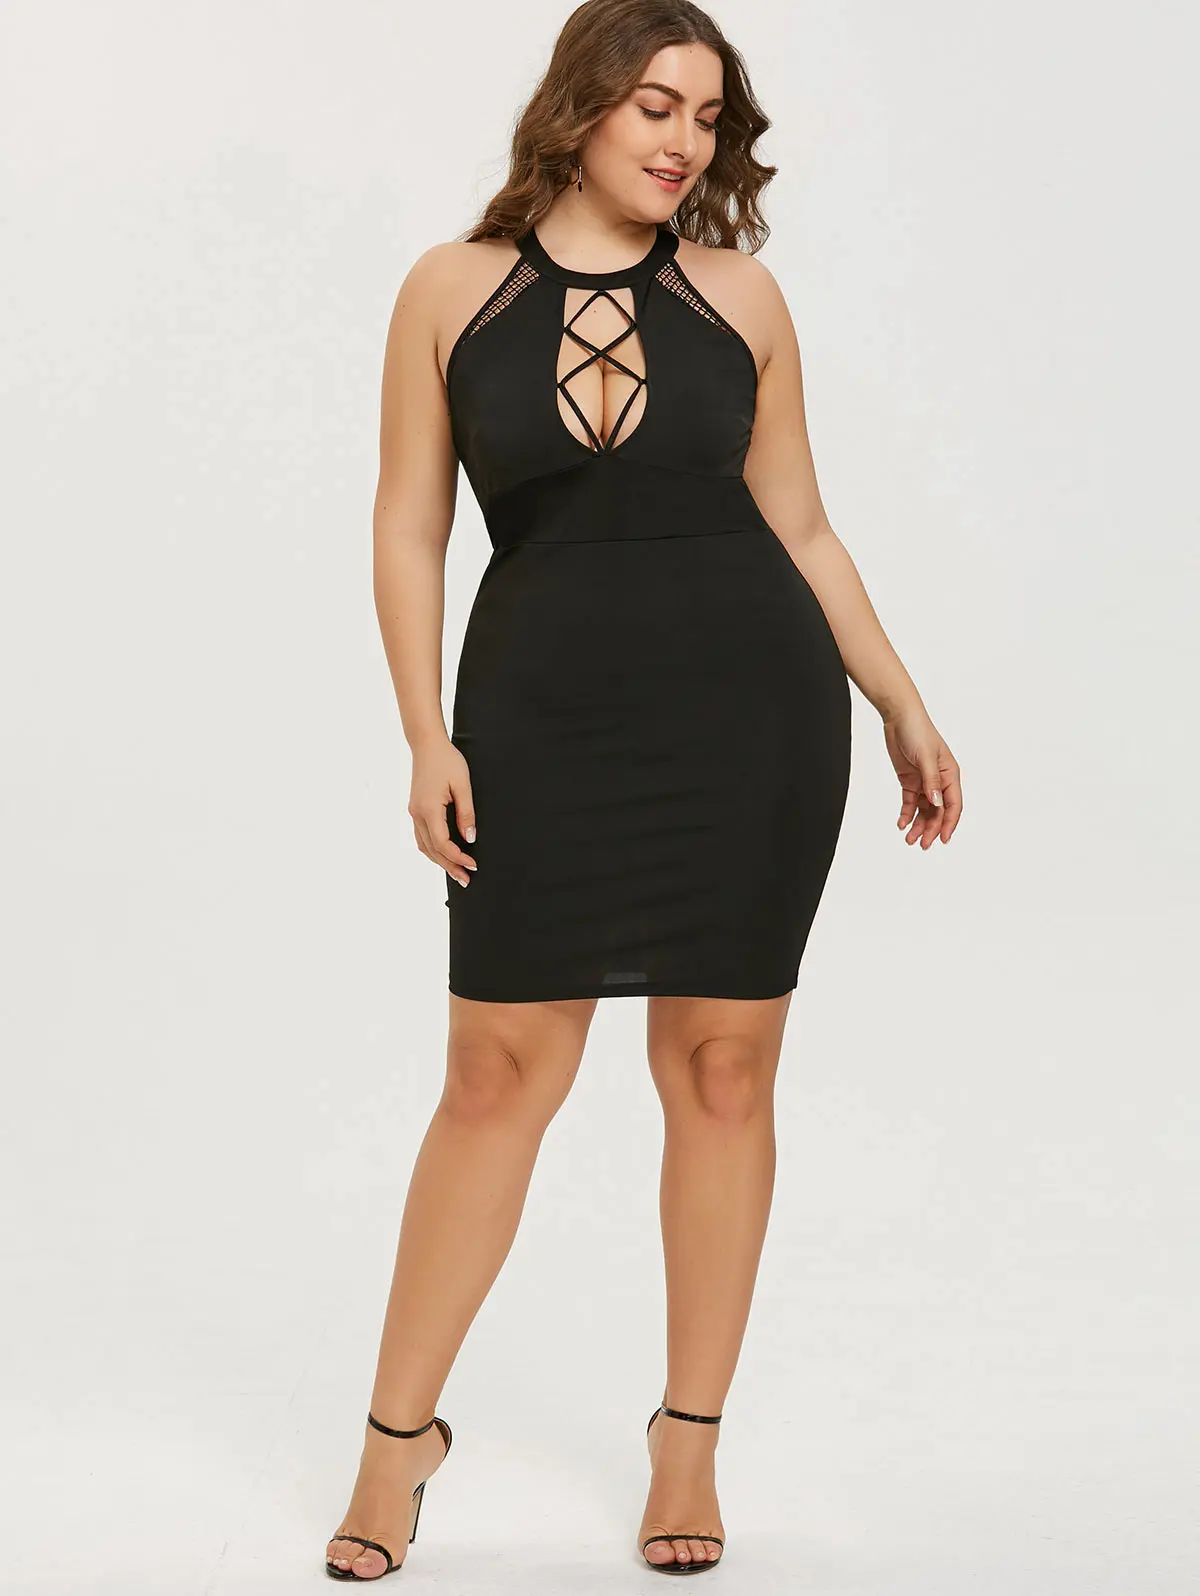 Aliexpress Buy Gamiss Women Plus Size Summer Dress Cut Out Sexy Club Party Dress Black O